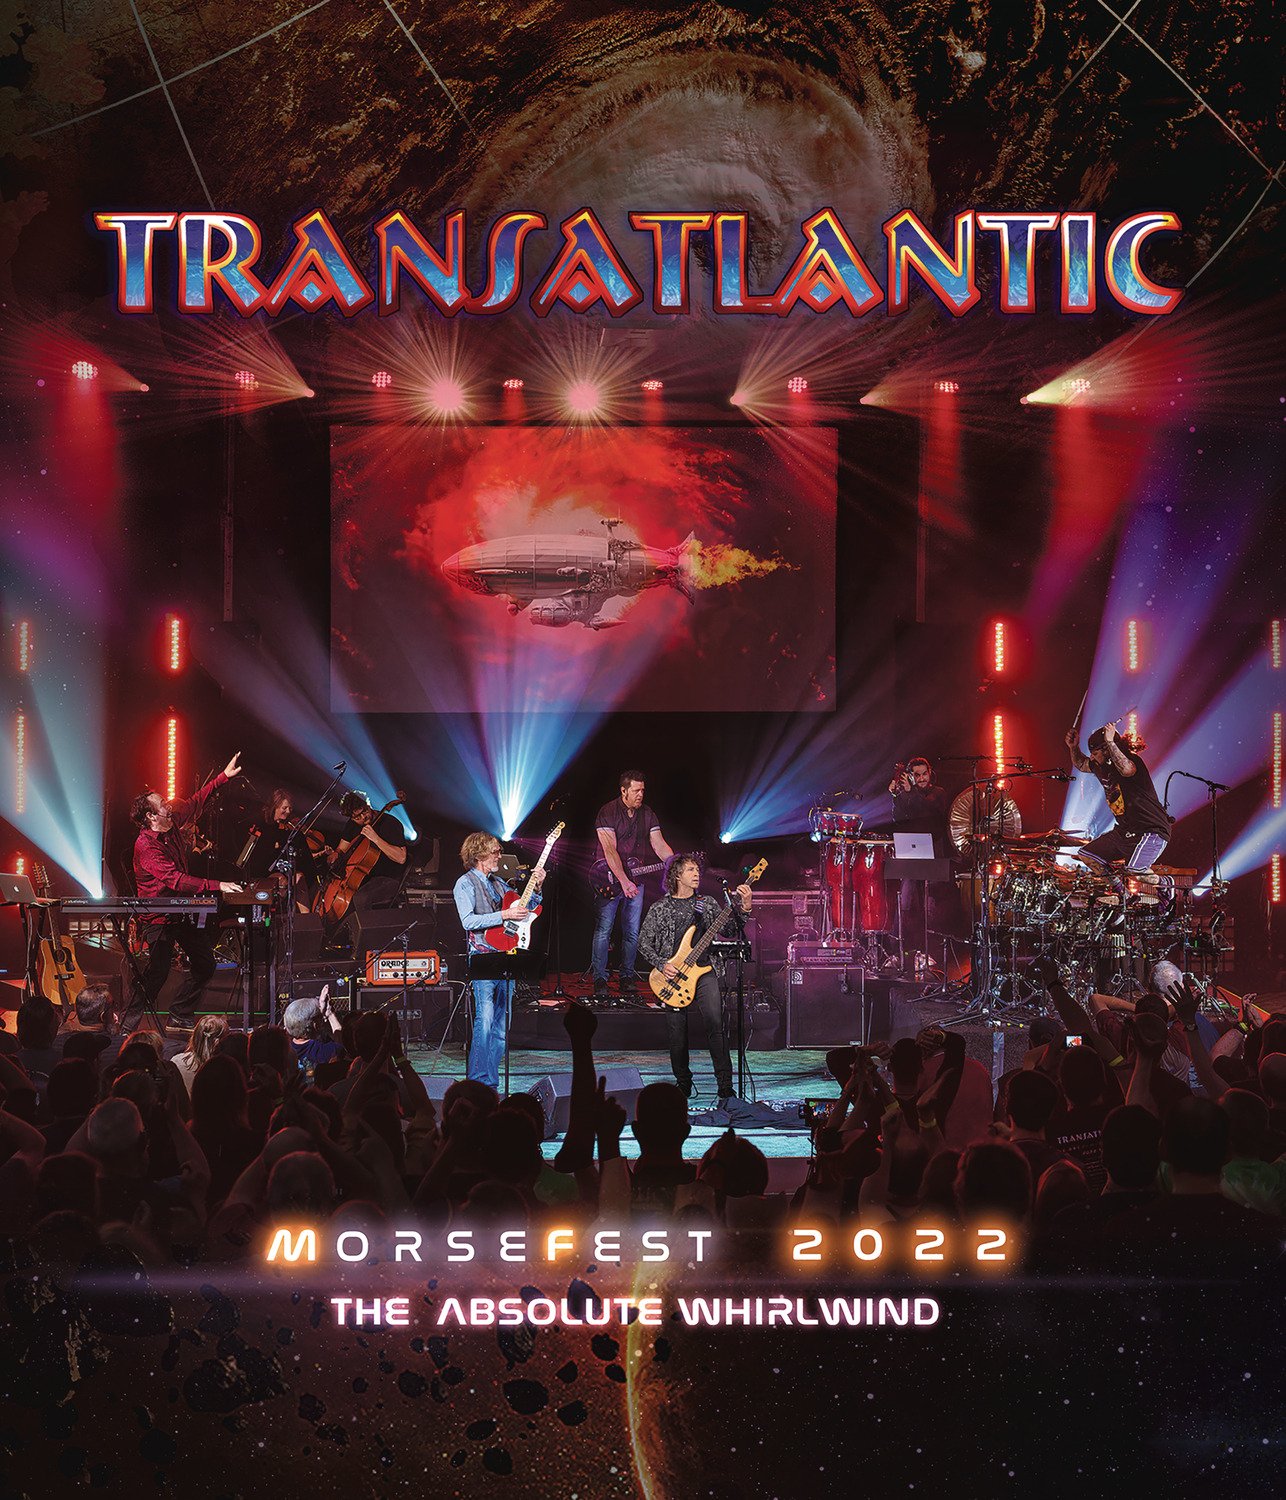 CD Shop - TRANSATLANTIC LIVE AT MORSEFEST 2022: THE ABSOLUTE WHIRLWIND